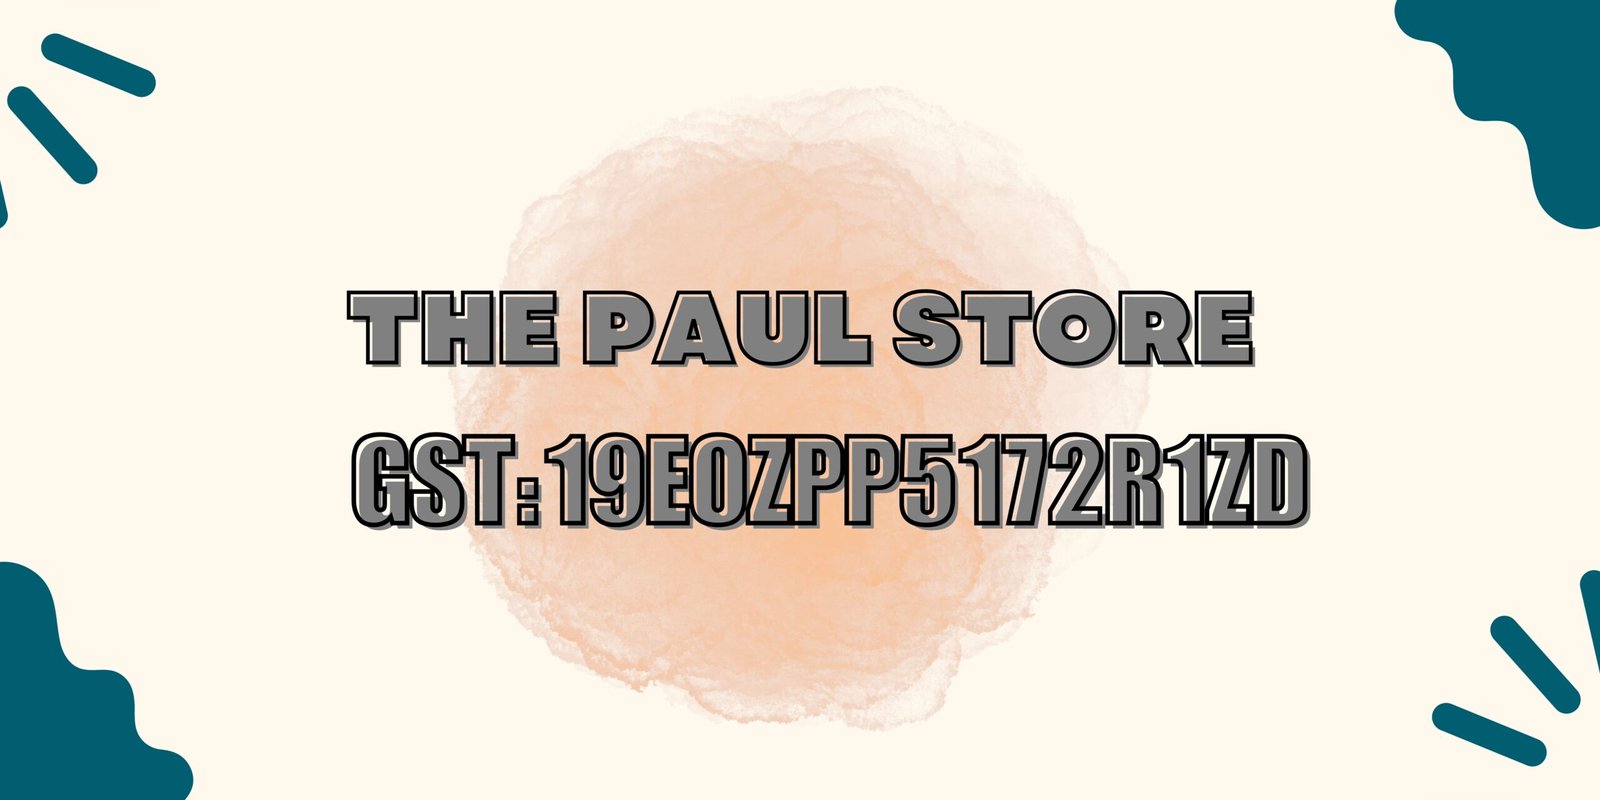 THE PAUL STORE